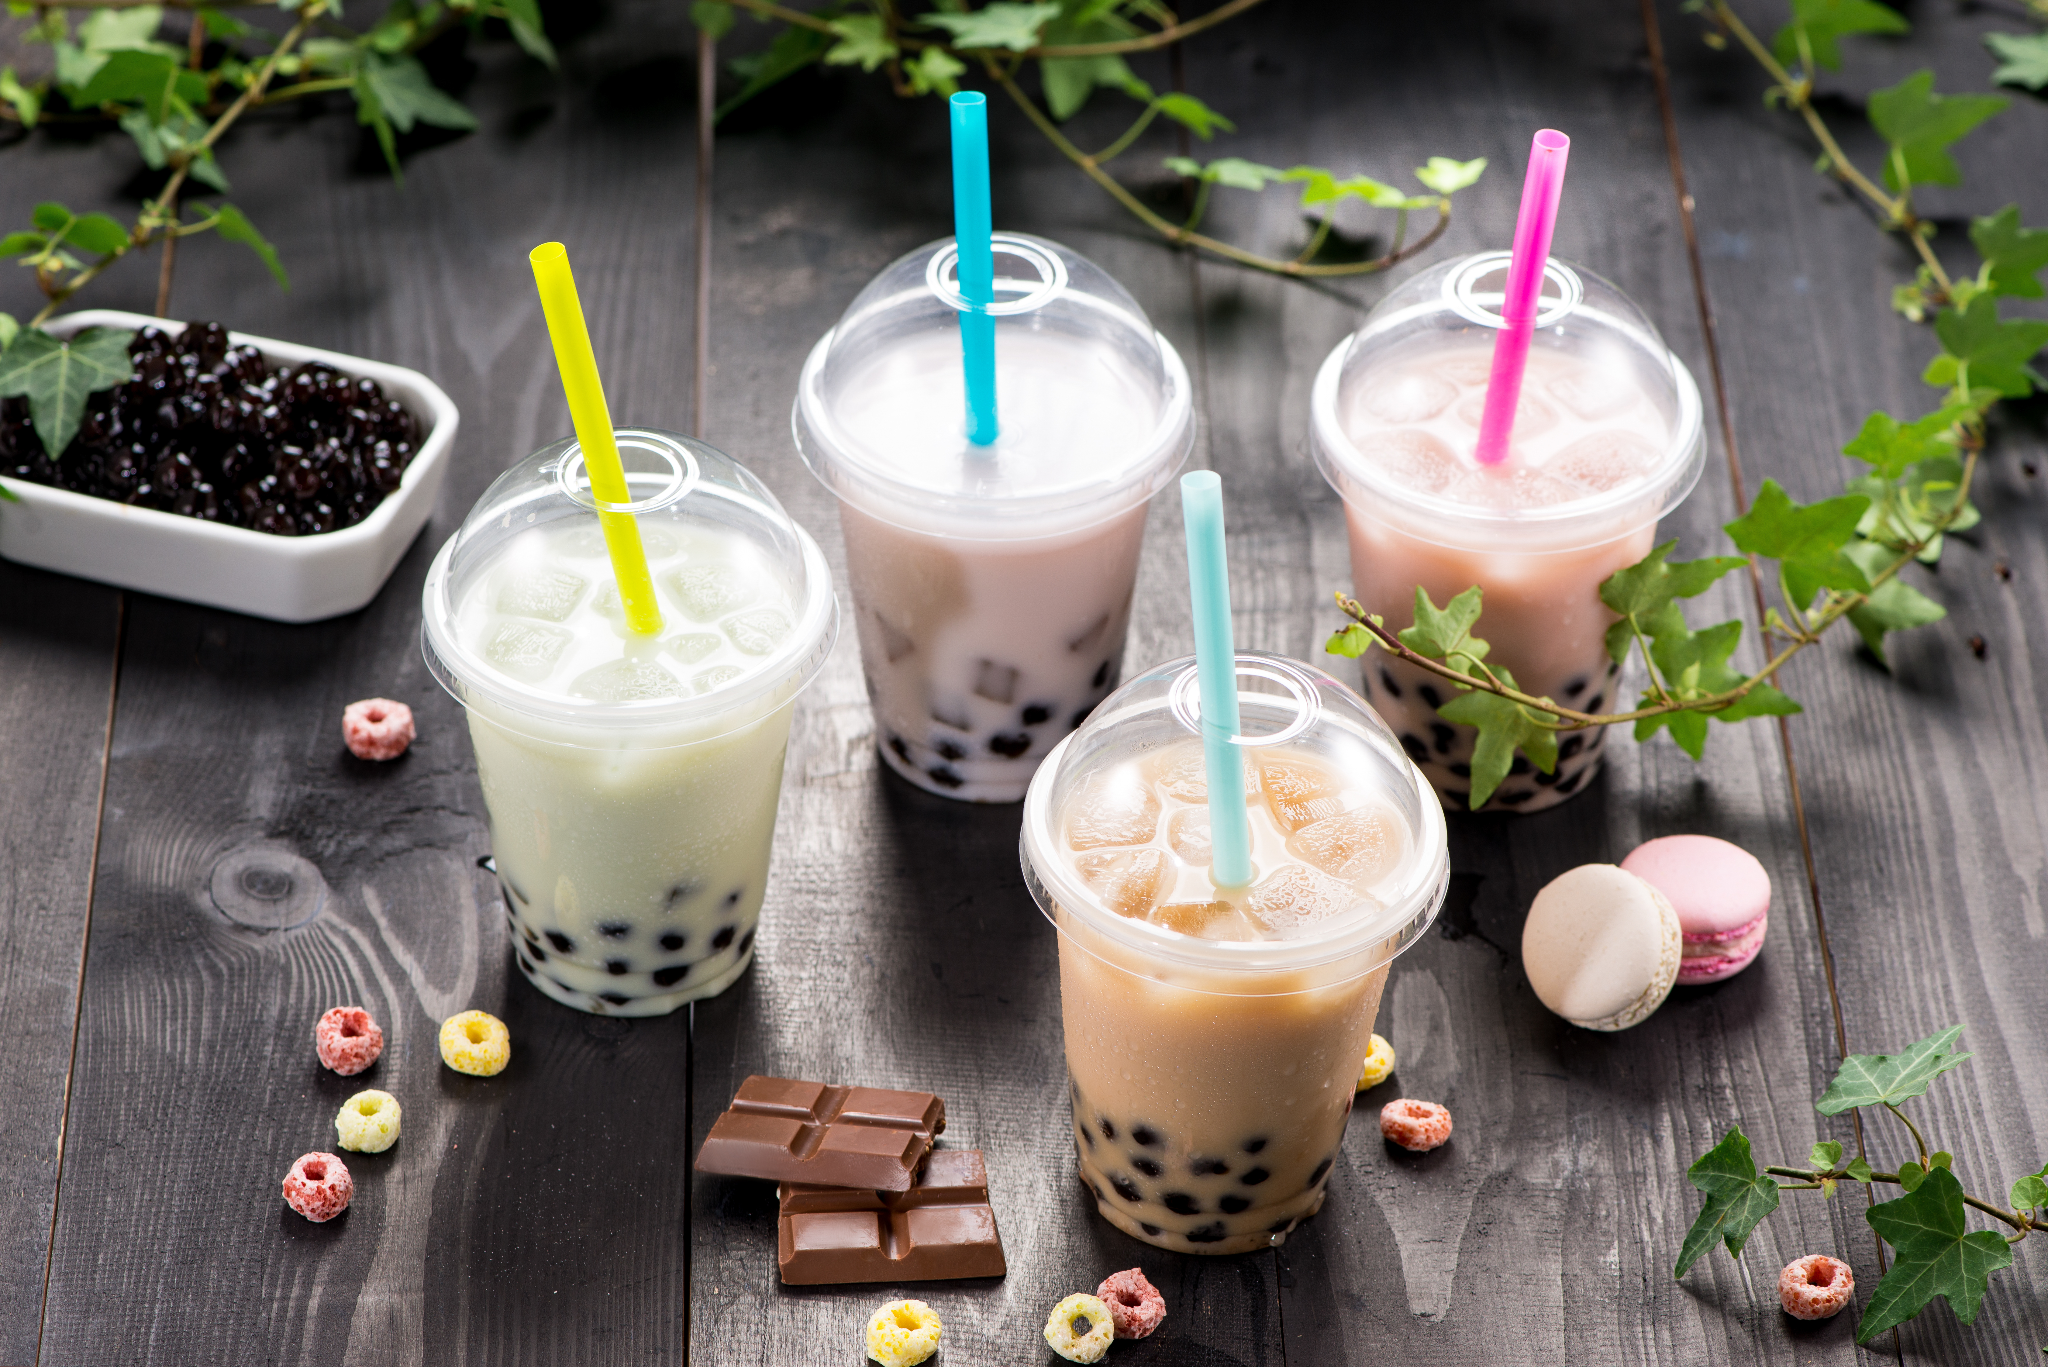 My reusable bubble tea cup experience: it's possible to